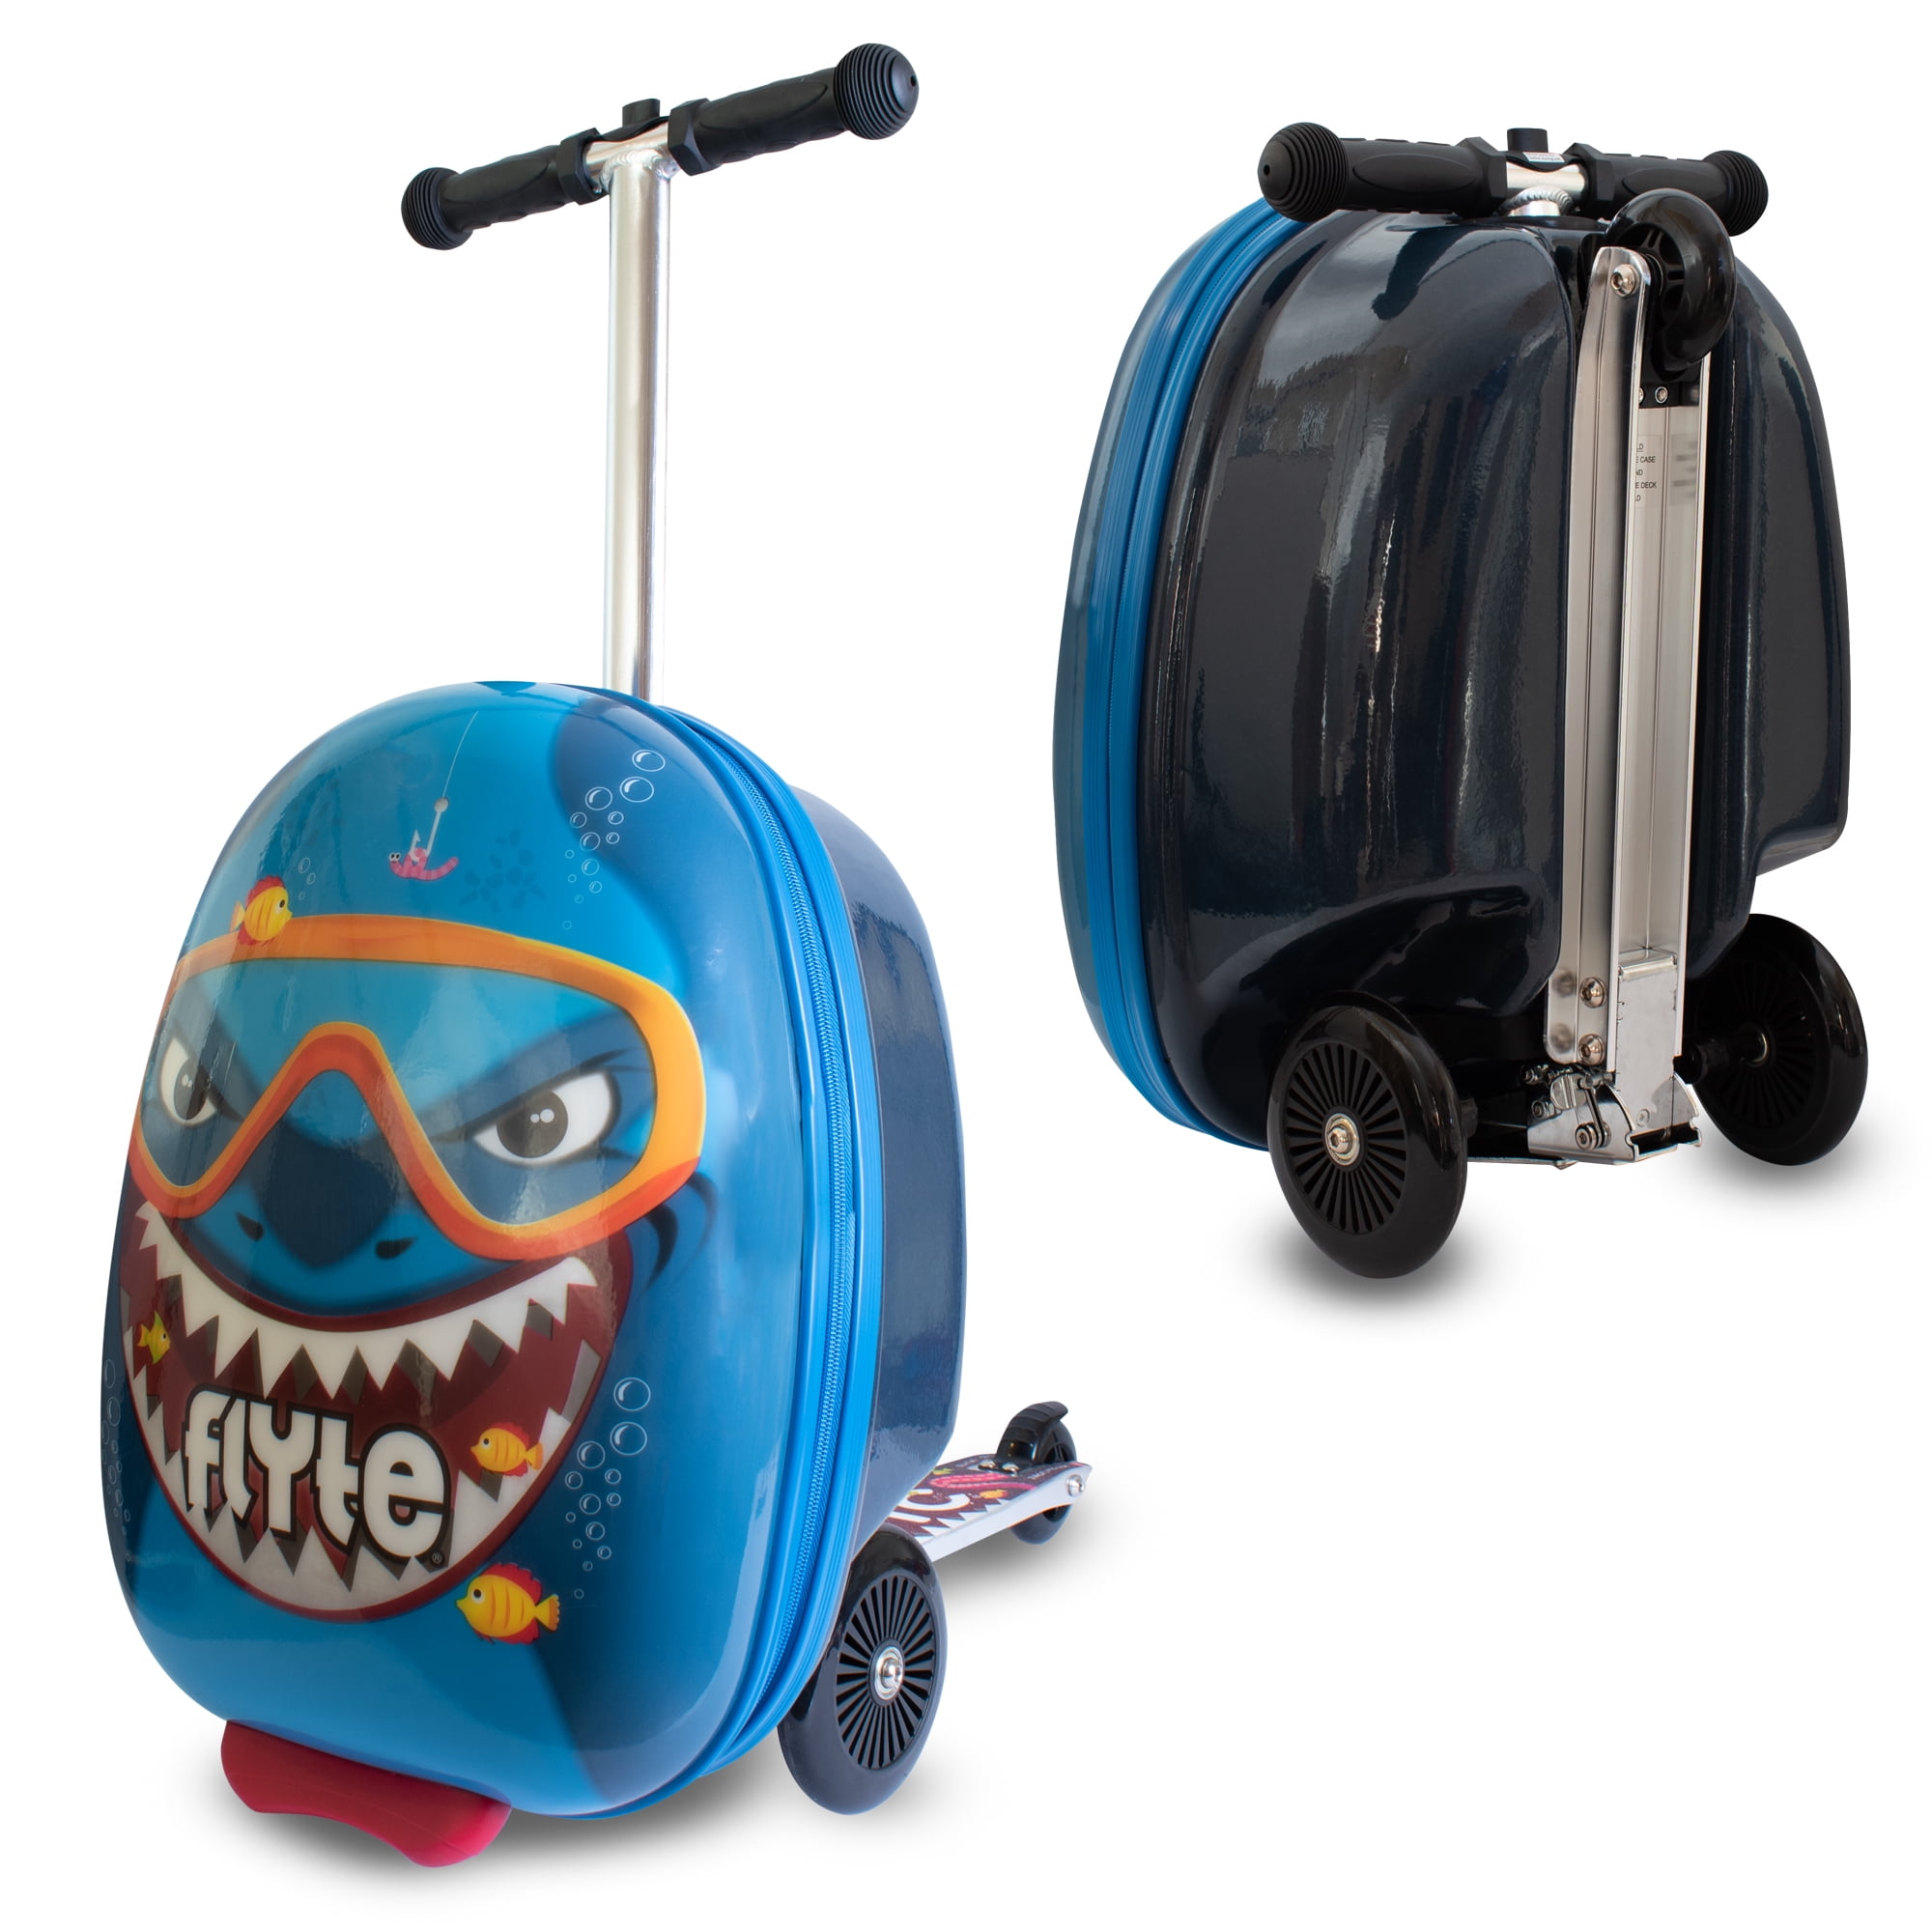 Costway 2-in-1 Folding Ride on Suitcase Scooter with LED Wheels Brake System Kids Toy Gifts